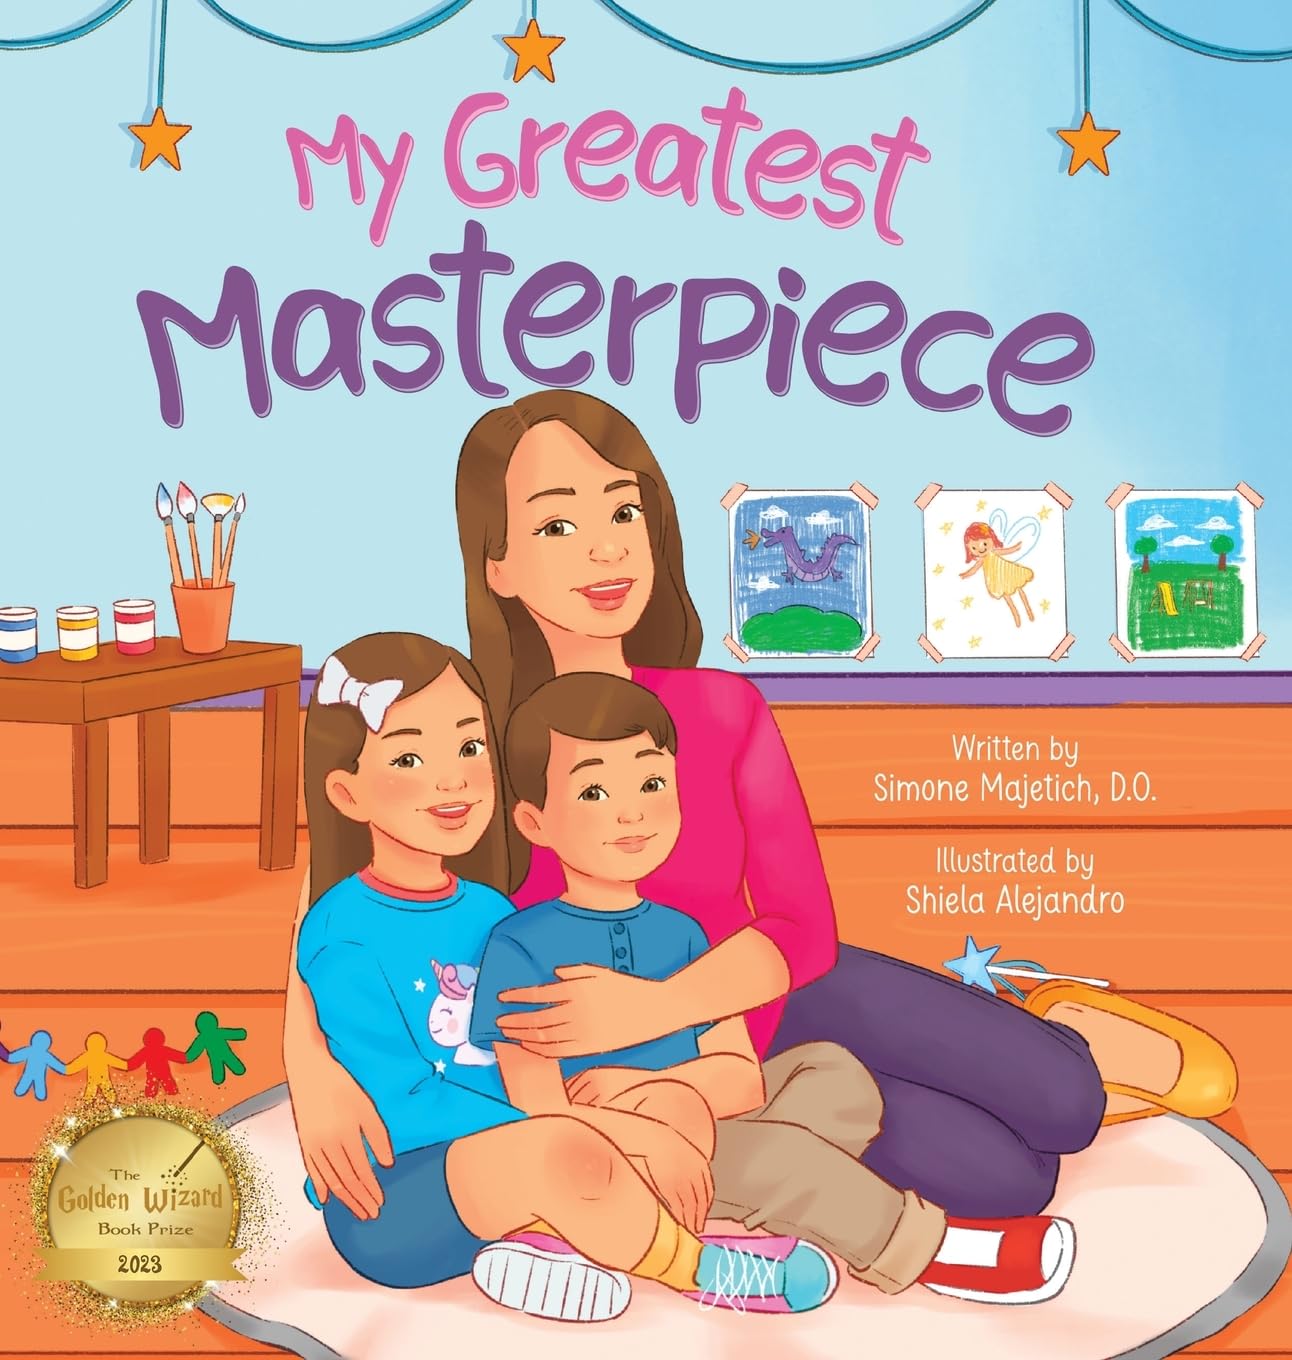 My Greatest Masterpiece: An Inspiring Children's Picture Book About the Magic of Art, Creativity, and Family. For Ages 3-7 (Mindful, Happy, Healthy Kids)